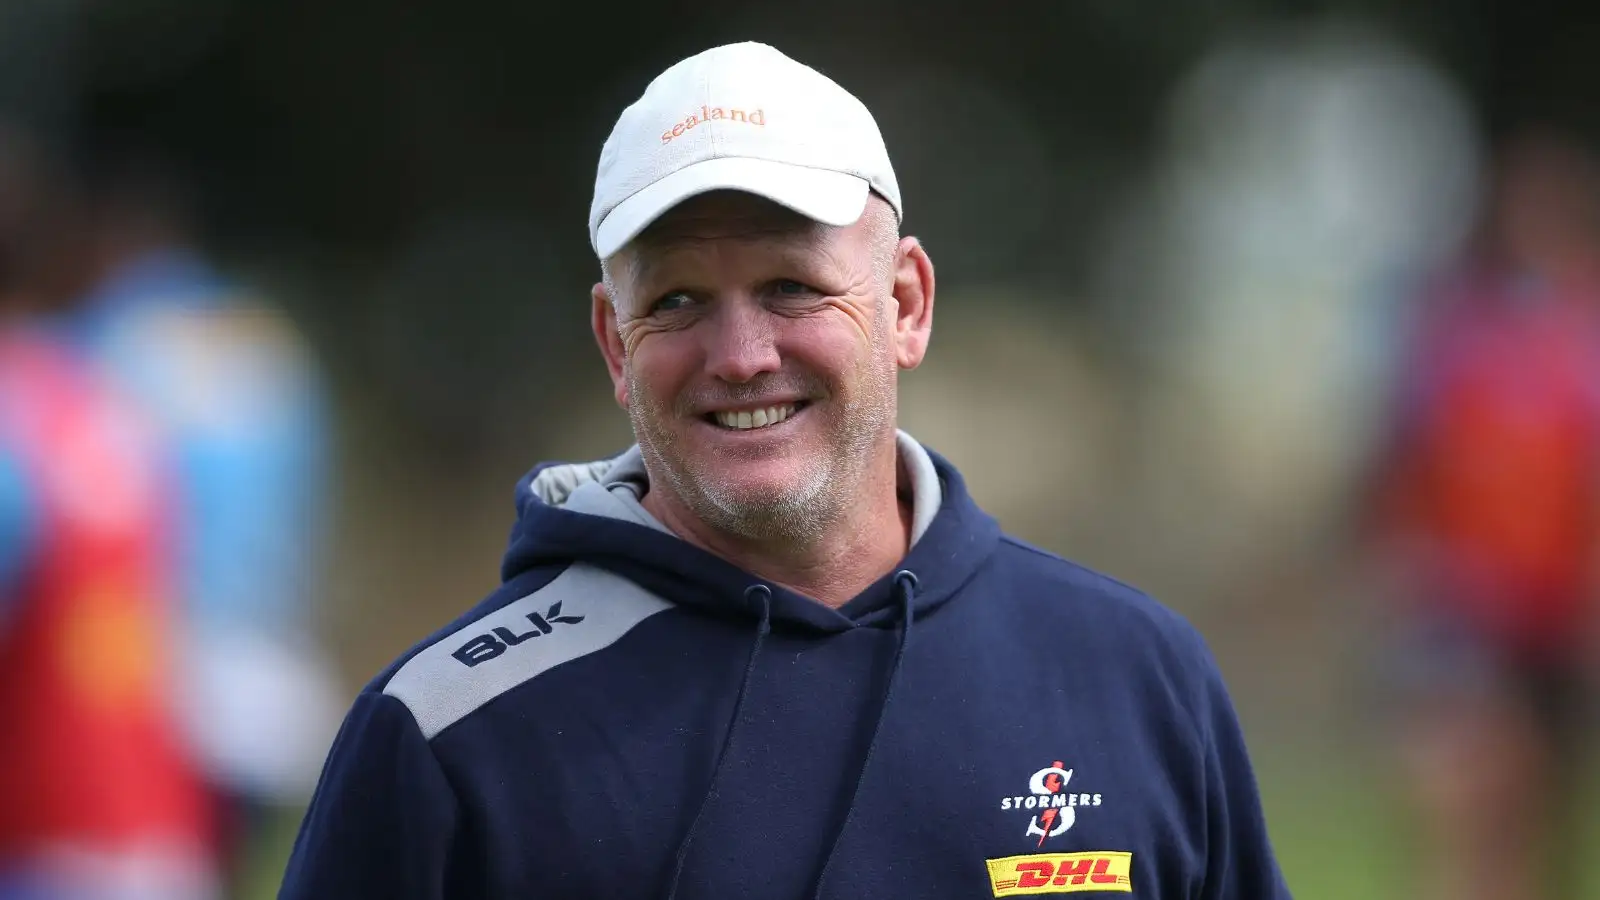 Stormers head coach John Dobson is eager for his side to finish the year on a high by beating the Lions in the United Rugby Championship on New Year's Eve, completing an unbeaten year at Cape Town Stadium. The Stormers host the Lions in Cape Town, the last team that managed to beat the United Rugby Championship (URC) champions at the ground.